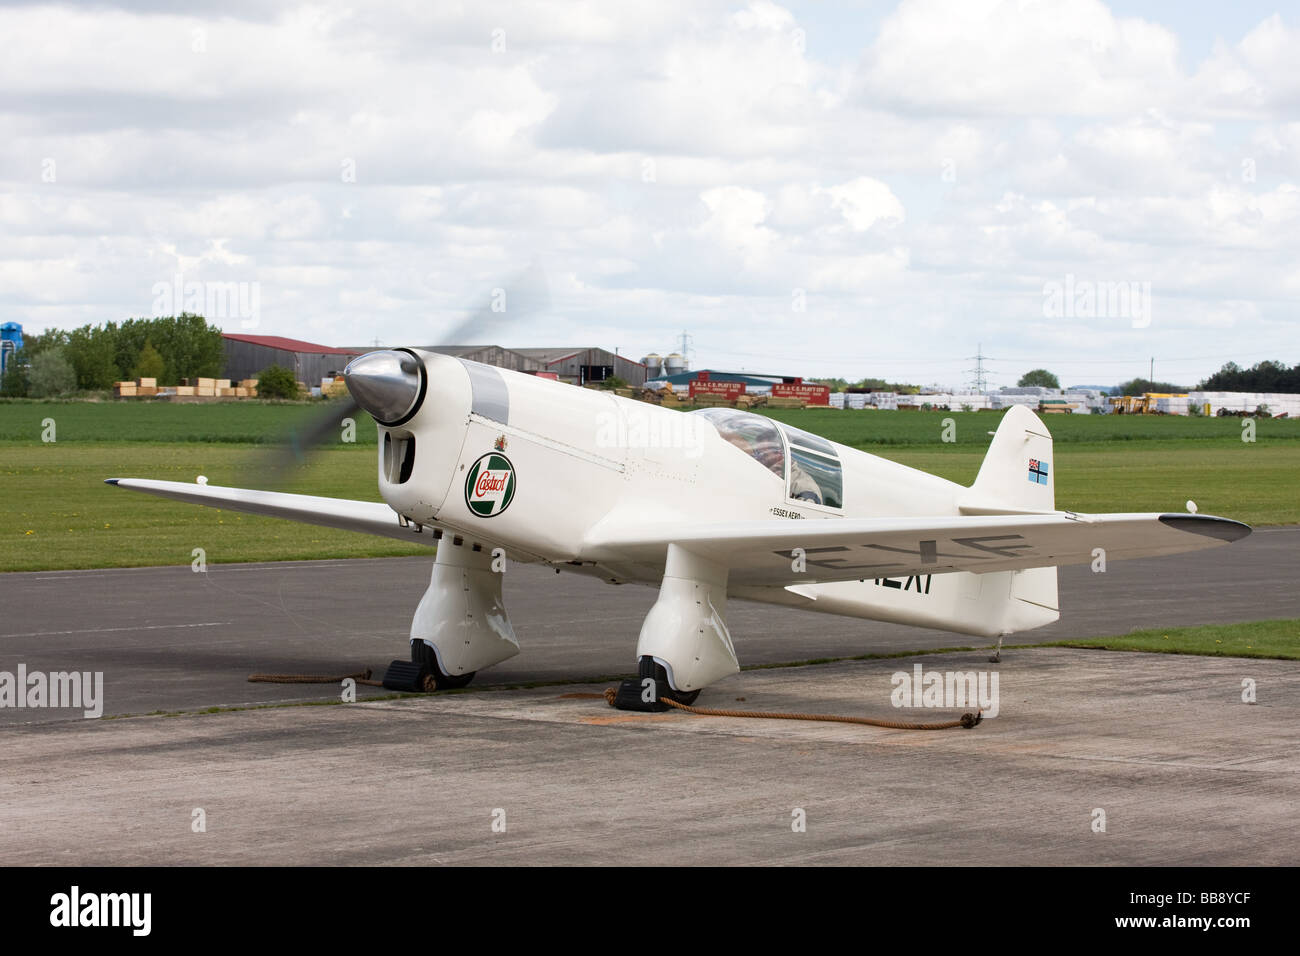 Percival Mew Gull G-AEXF parked at Breighton Airfield with engine running Stock Photo